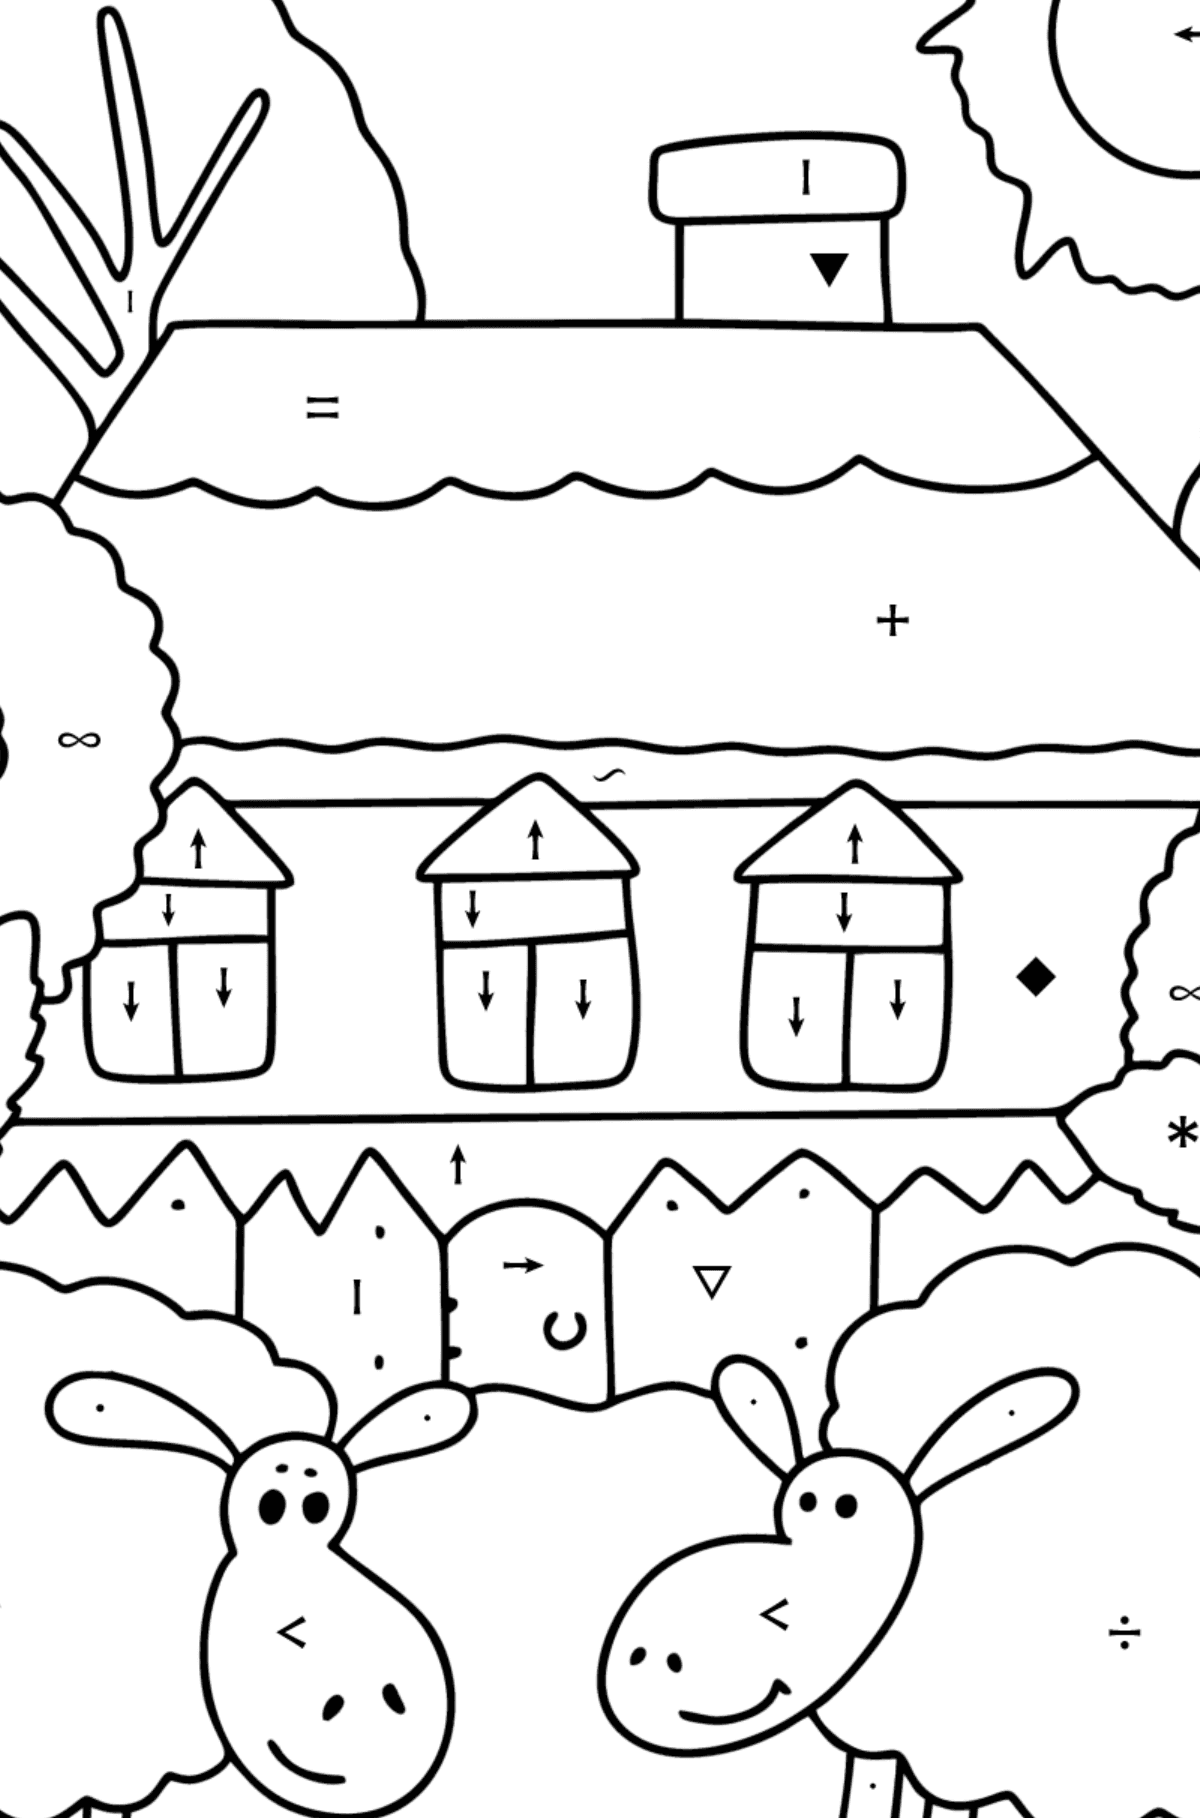 FarmHouse coloring page - Coloring by Symbols for Kids